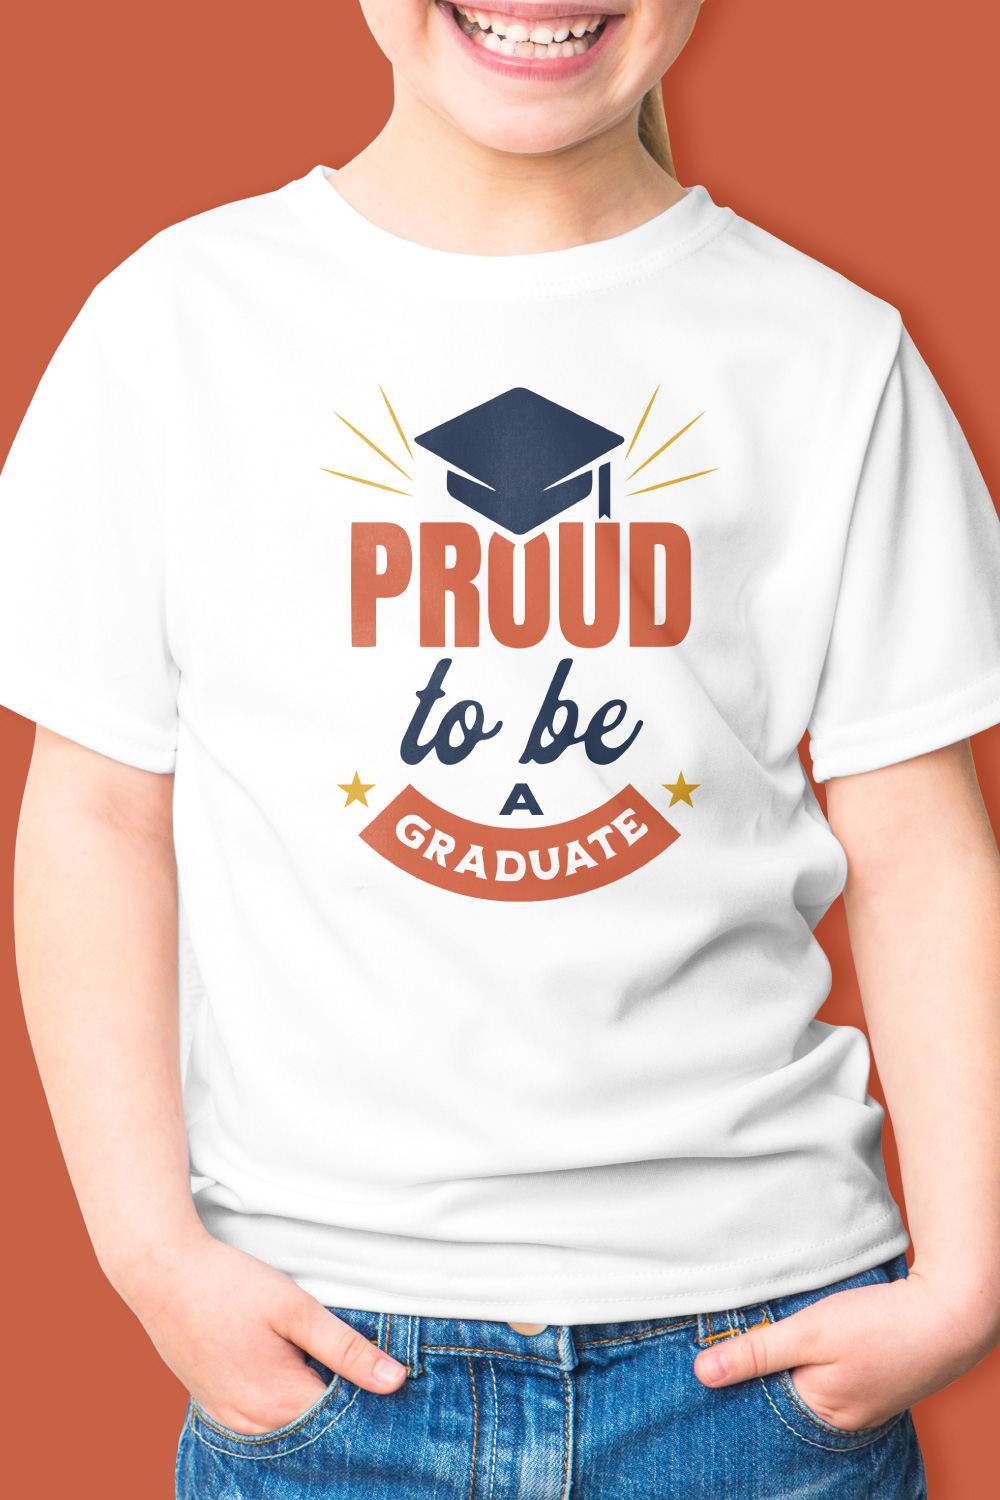 Proud to be a graduate tshirt design pinterest preview image.